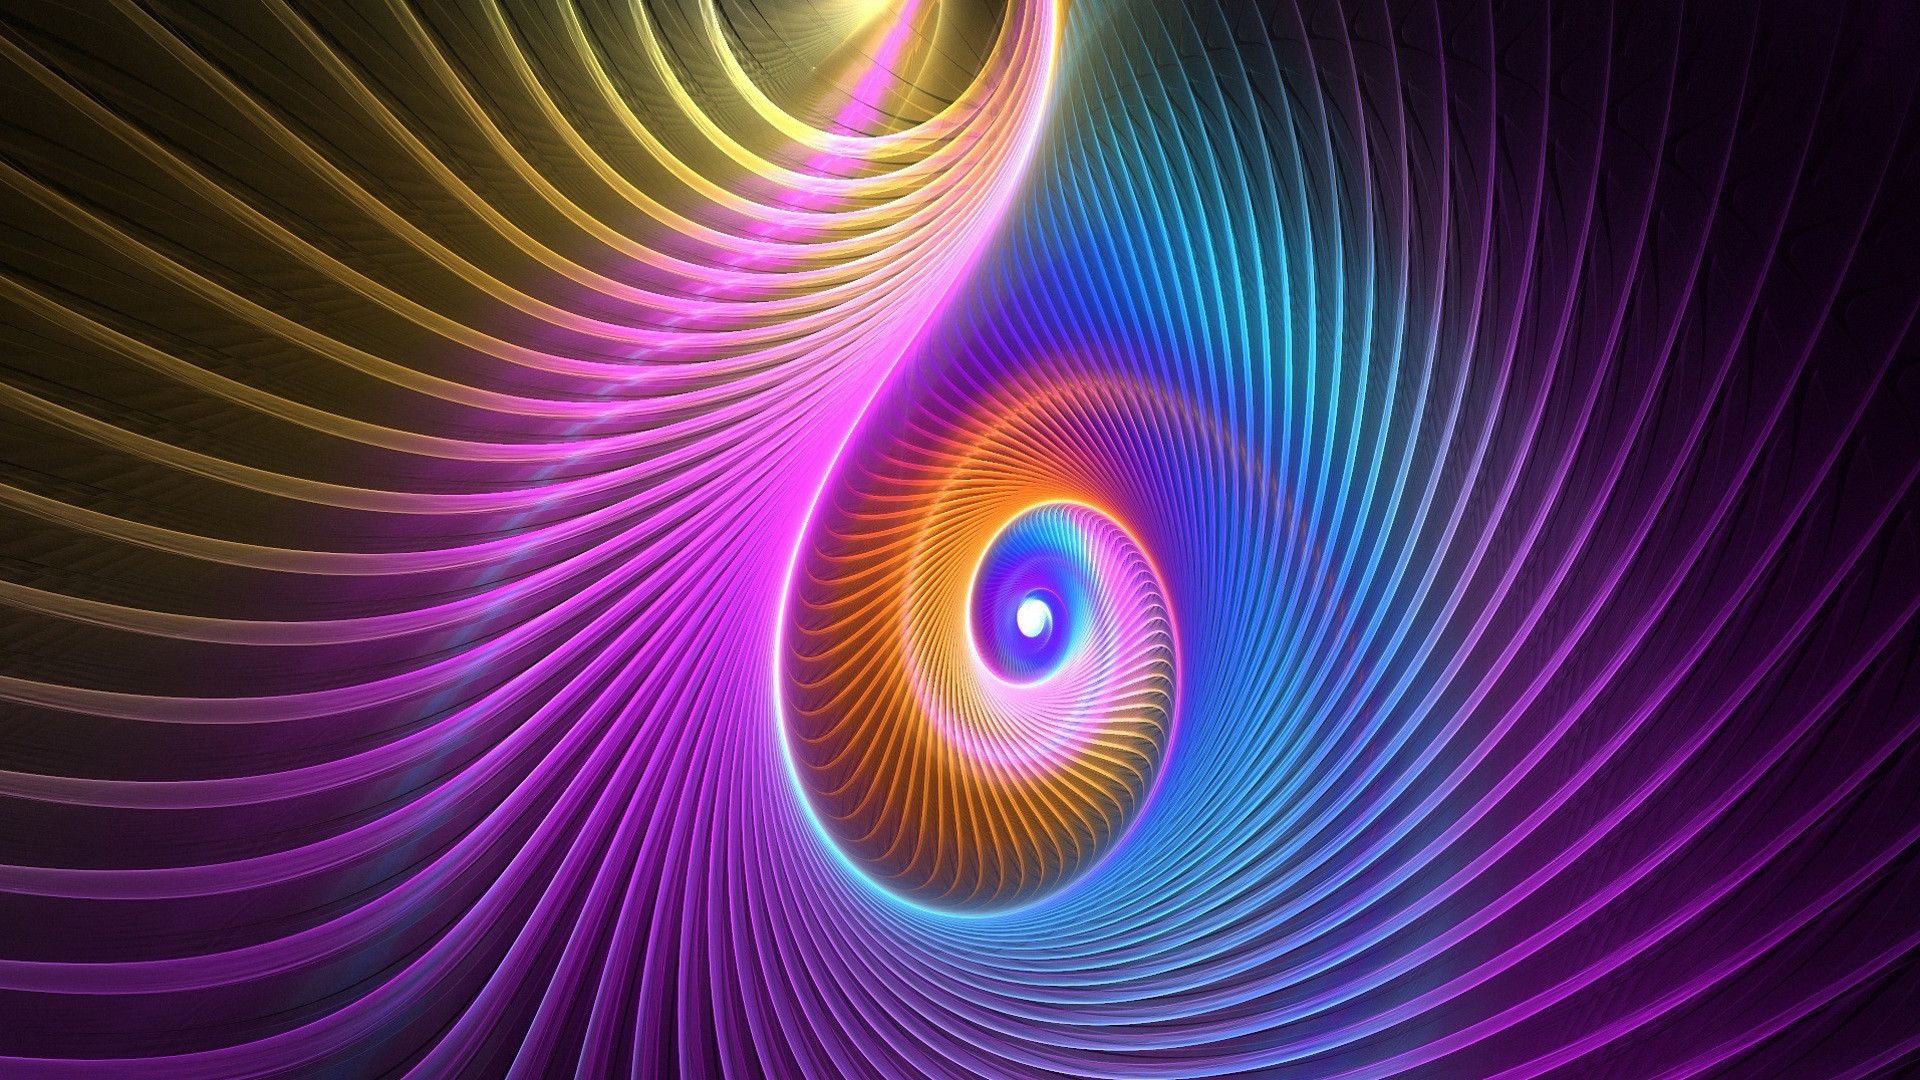 1920x1080 abstract fractal colorful bright wallpapers - My Yahoo Image Search Results